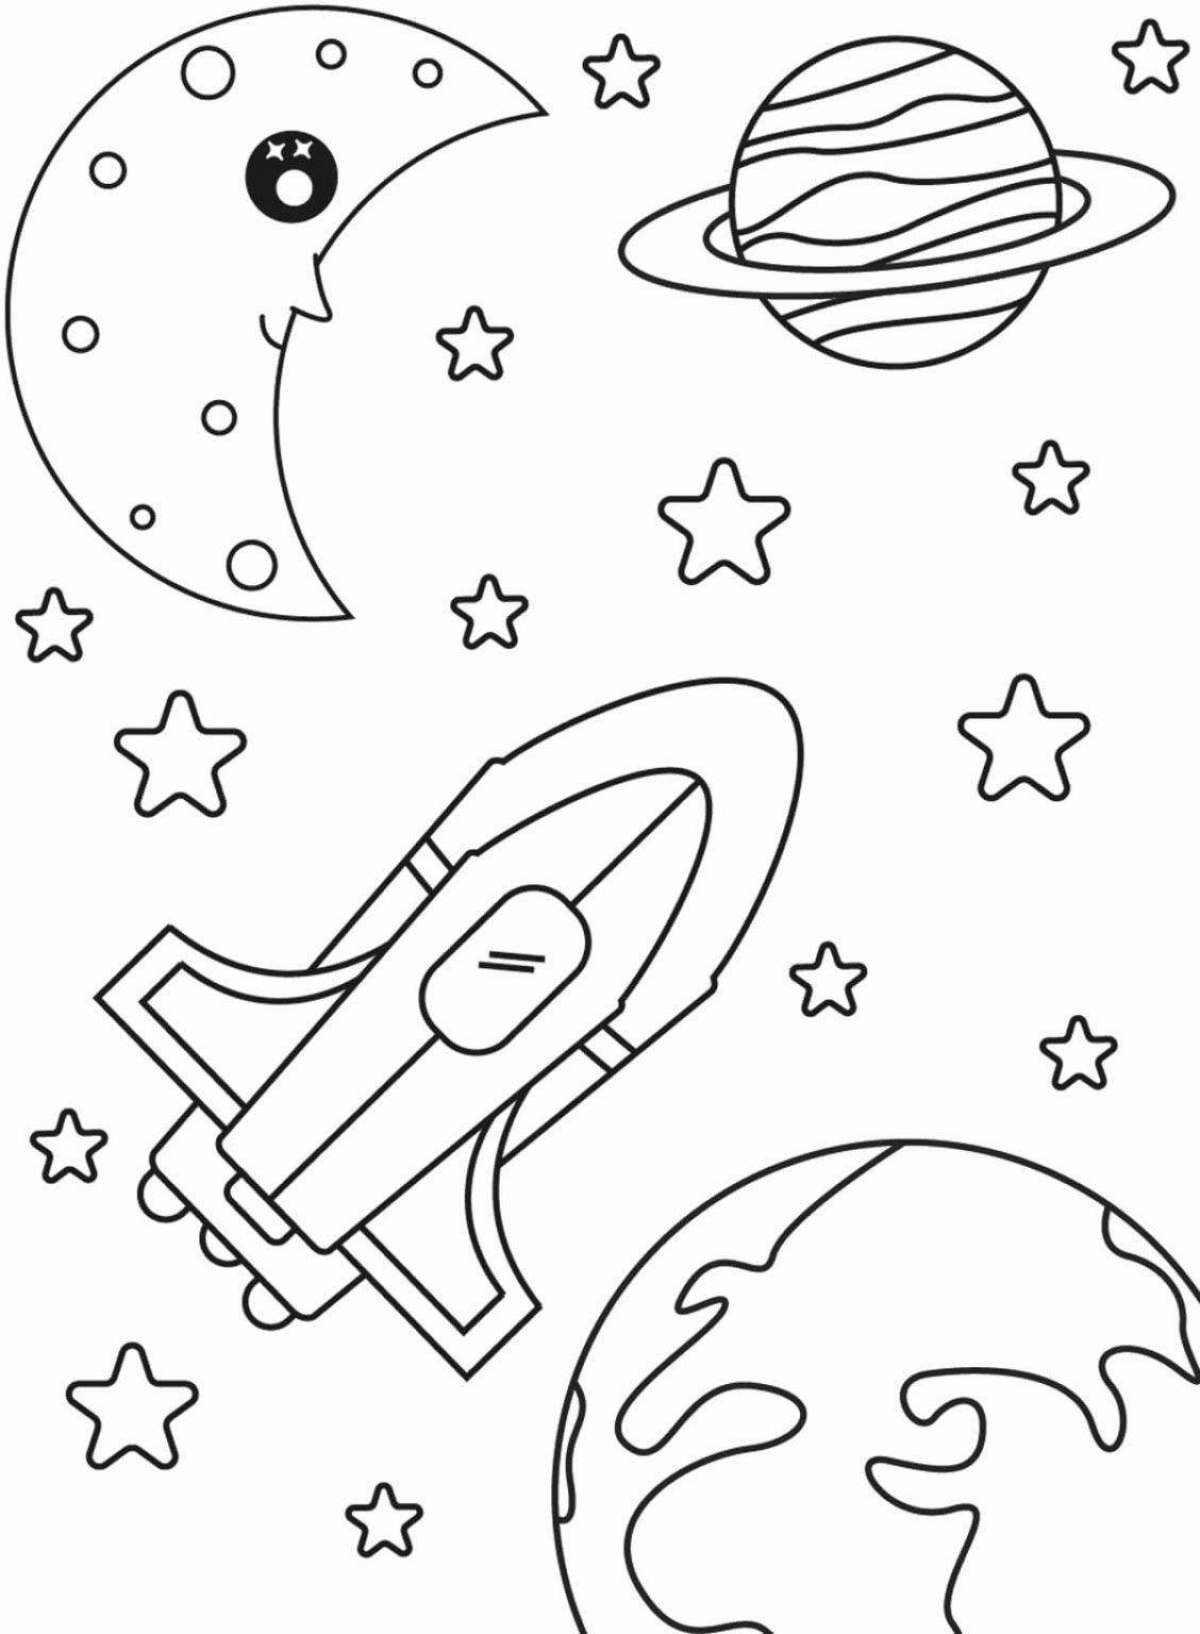 Colorful space coloring book for 3-4 year olds